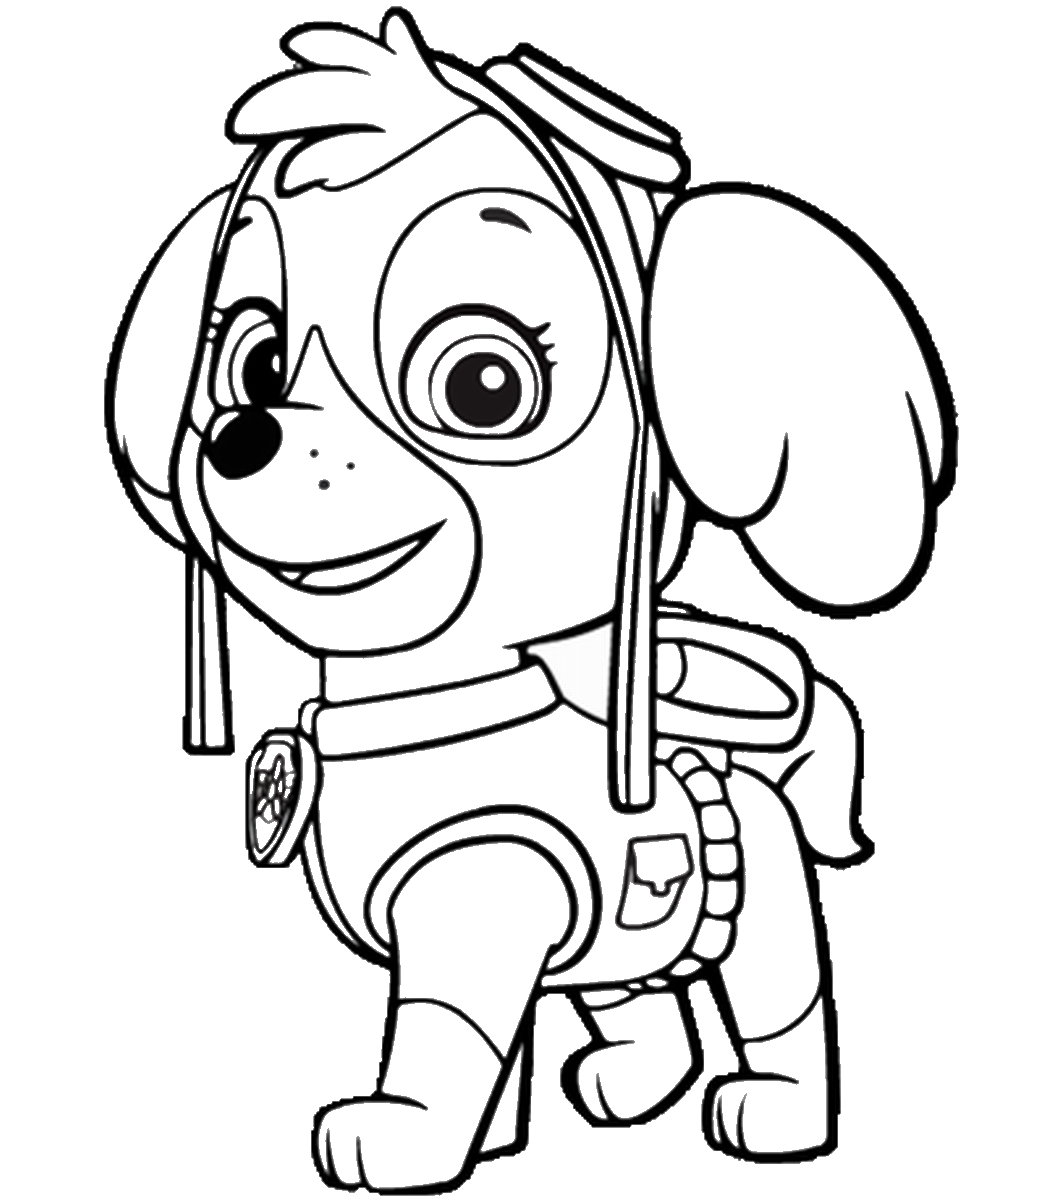 Paw Patrol Coloring Pages Best Coloring Pages For Kids